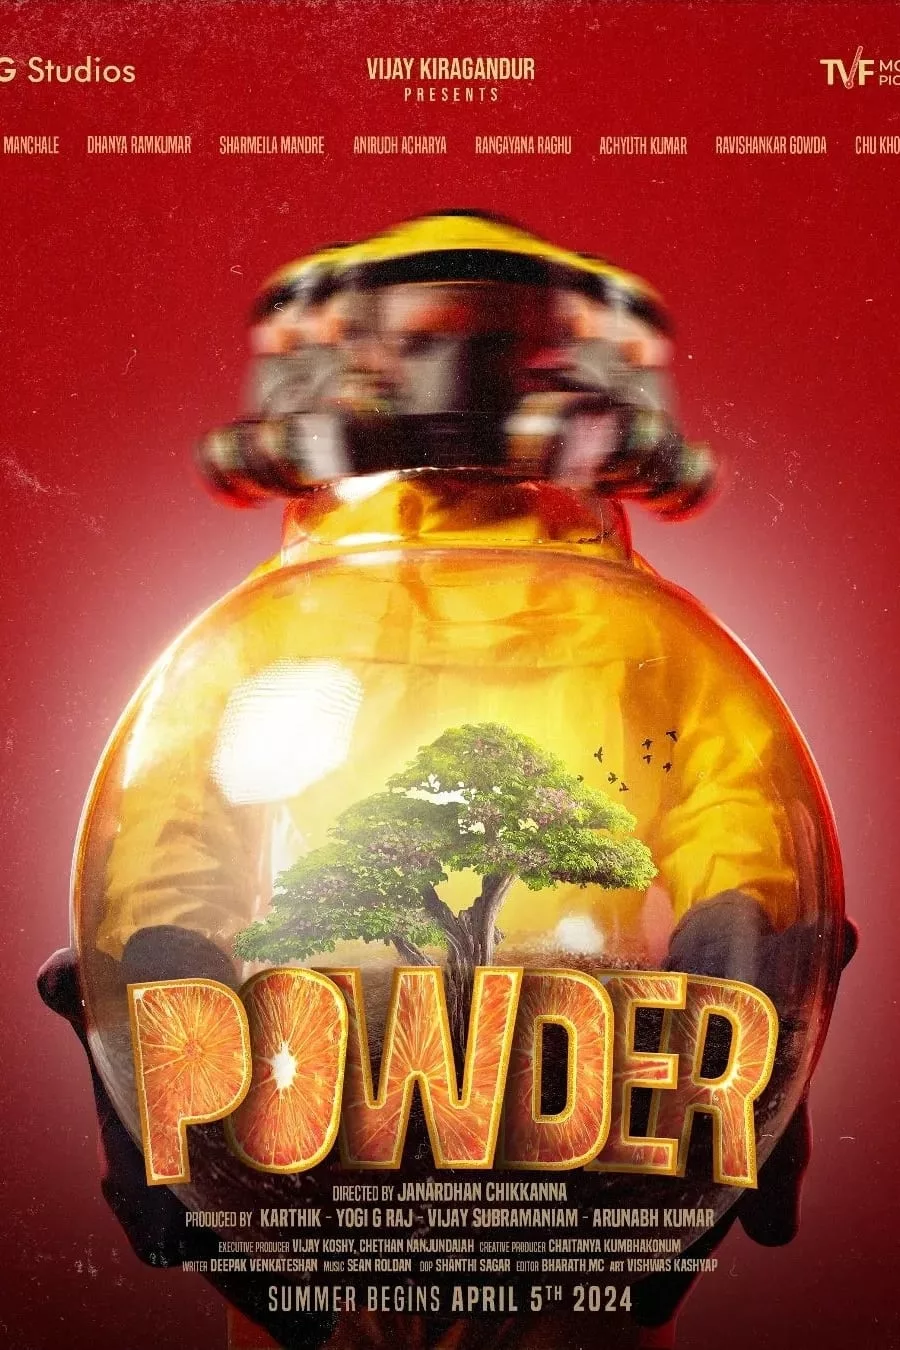 Poster for the movie "Powder"